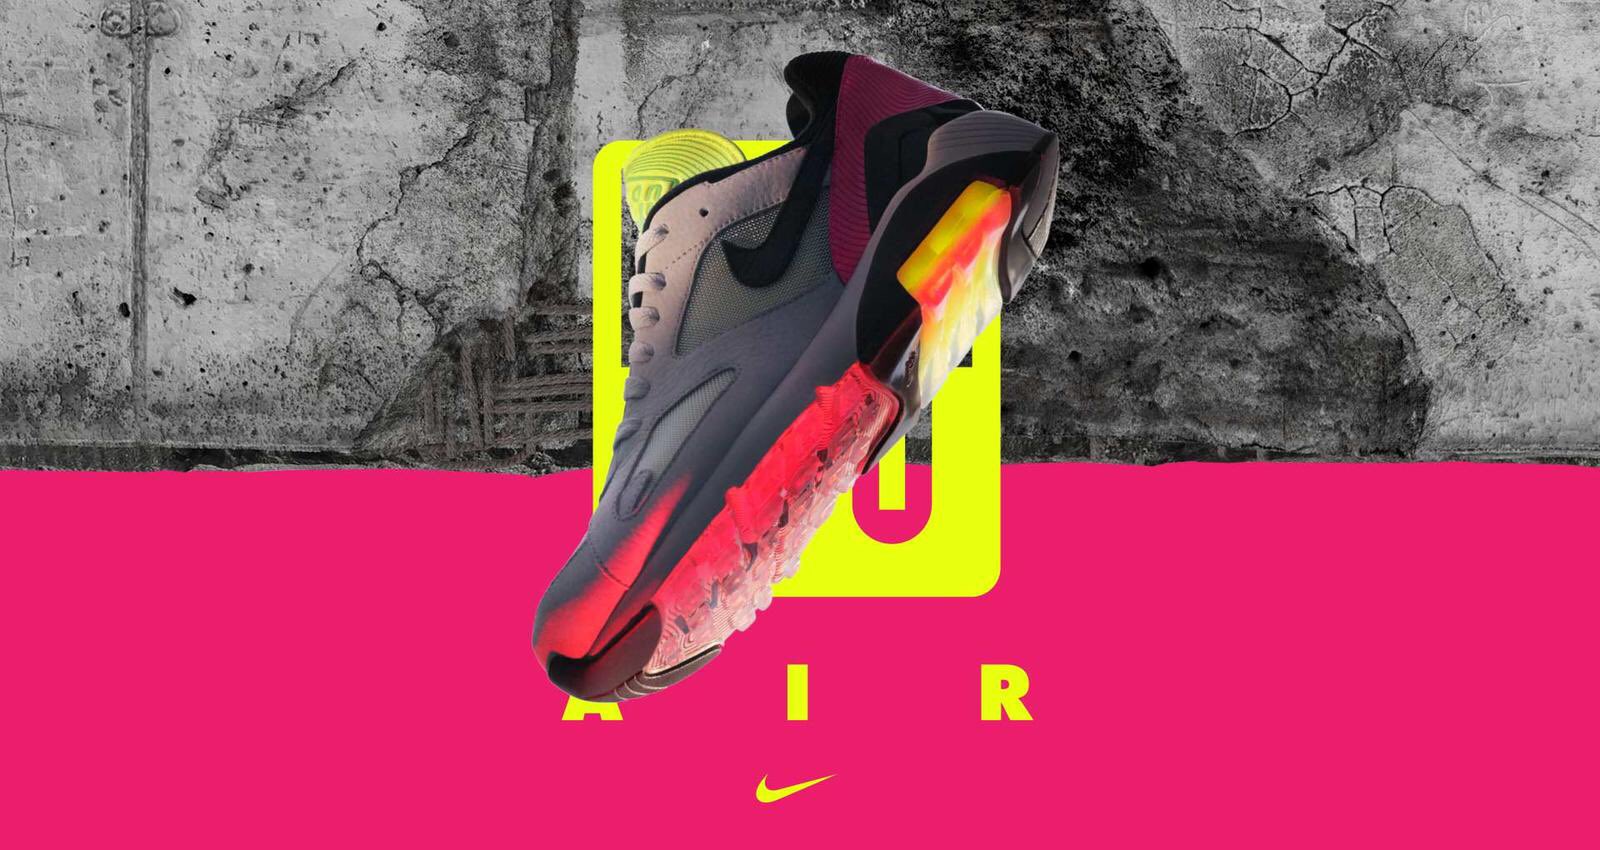 B/R Kicks on Twitter: "The Nike Air Max 180 BLN celebrates unique nightlife and music culture. The shoe releases on Air Max Day in Berlin only. March 30 for the rest